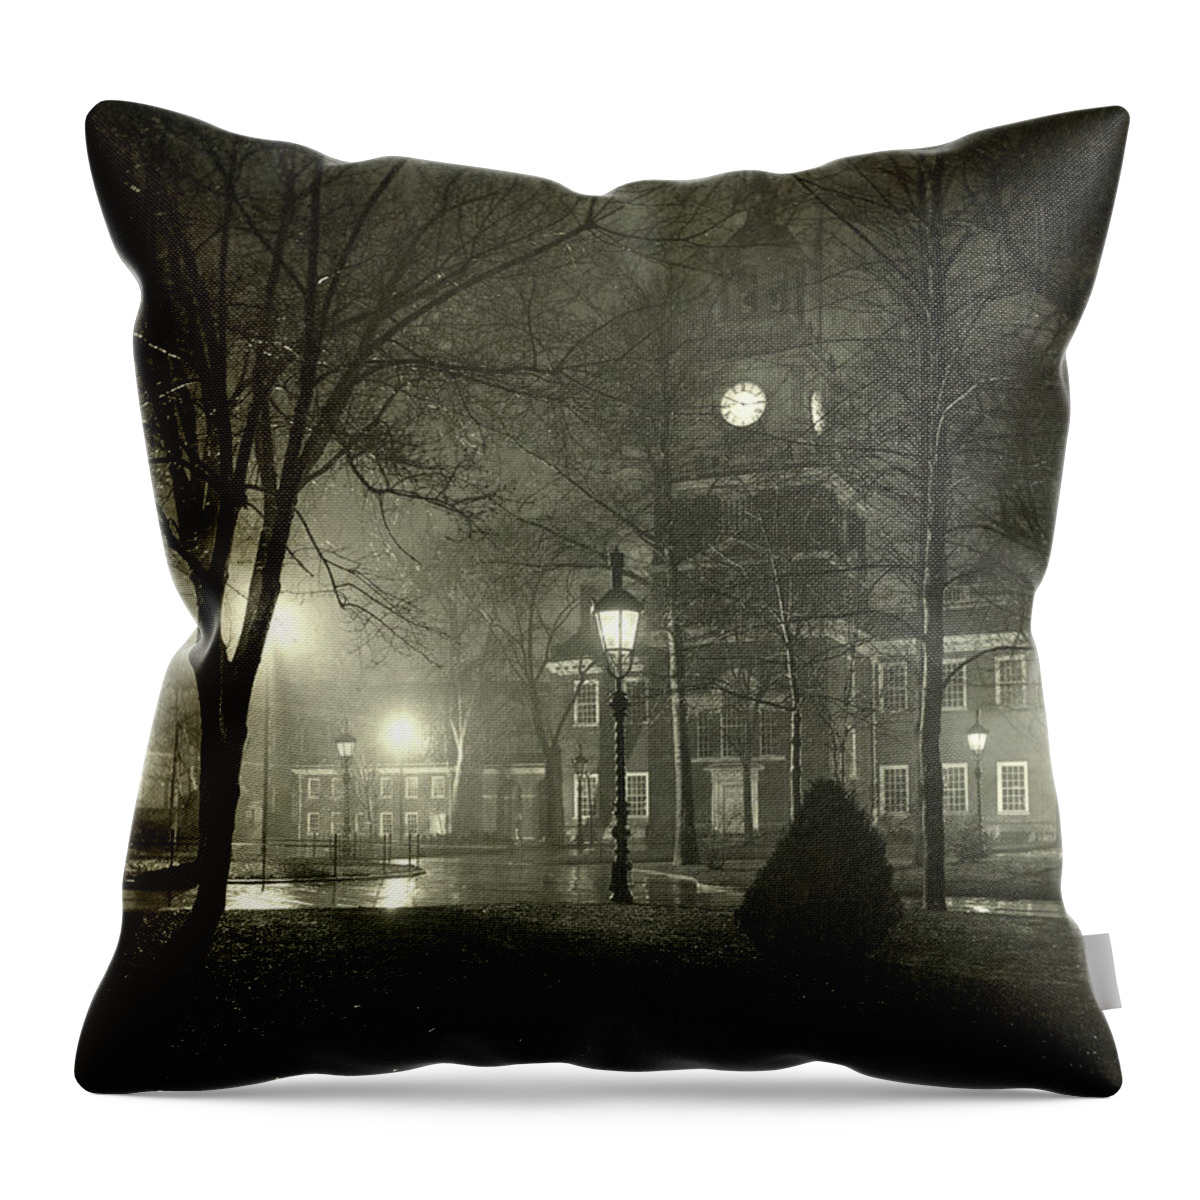 Independence Square Throw Pillow featuring the photograph Independence Square, 1899 by Unknown